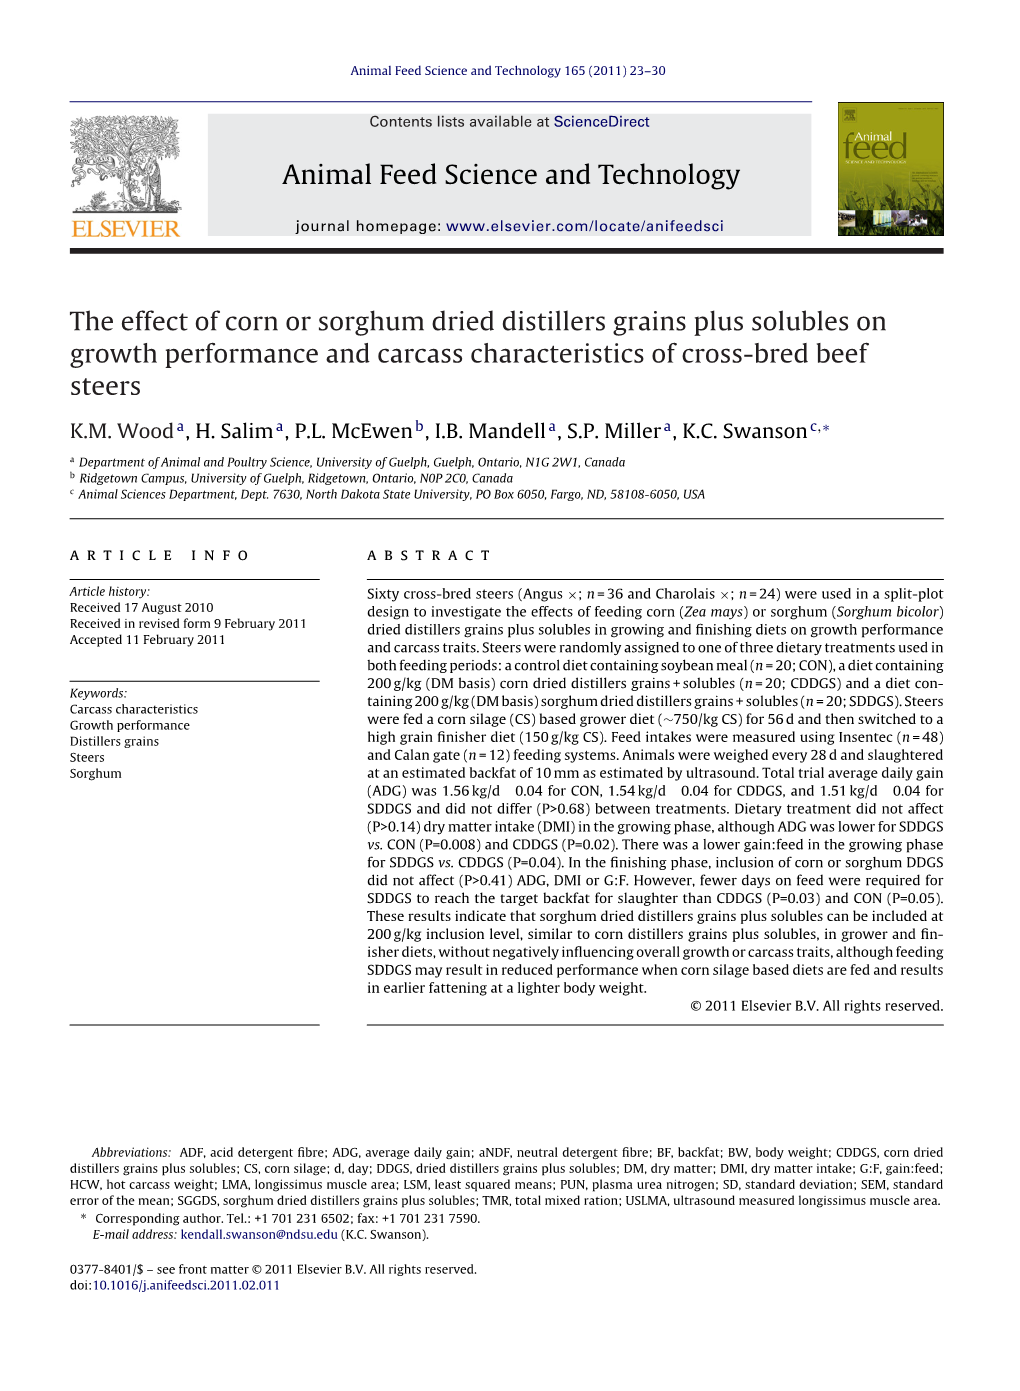 The Effect of Corn Or Sorghum Dried Distillers Grains Plus Solubles on Growth Performance and Carcass Characteristics of Cross-Bred Beef Steers